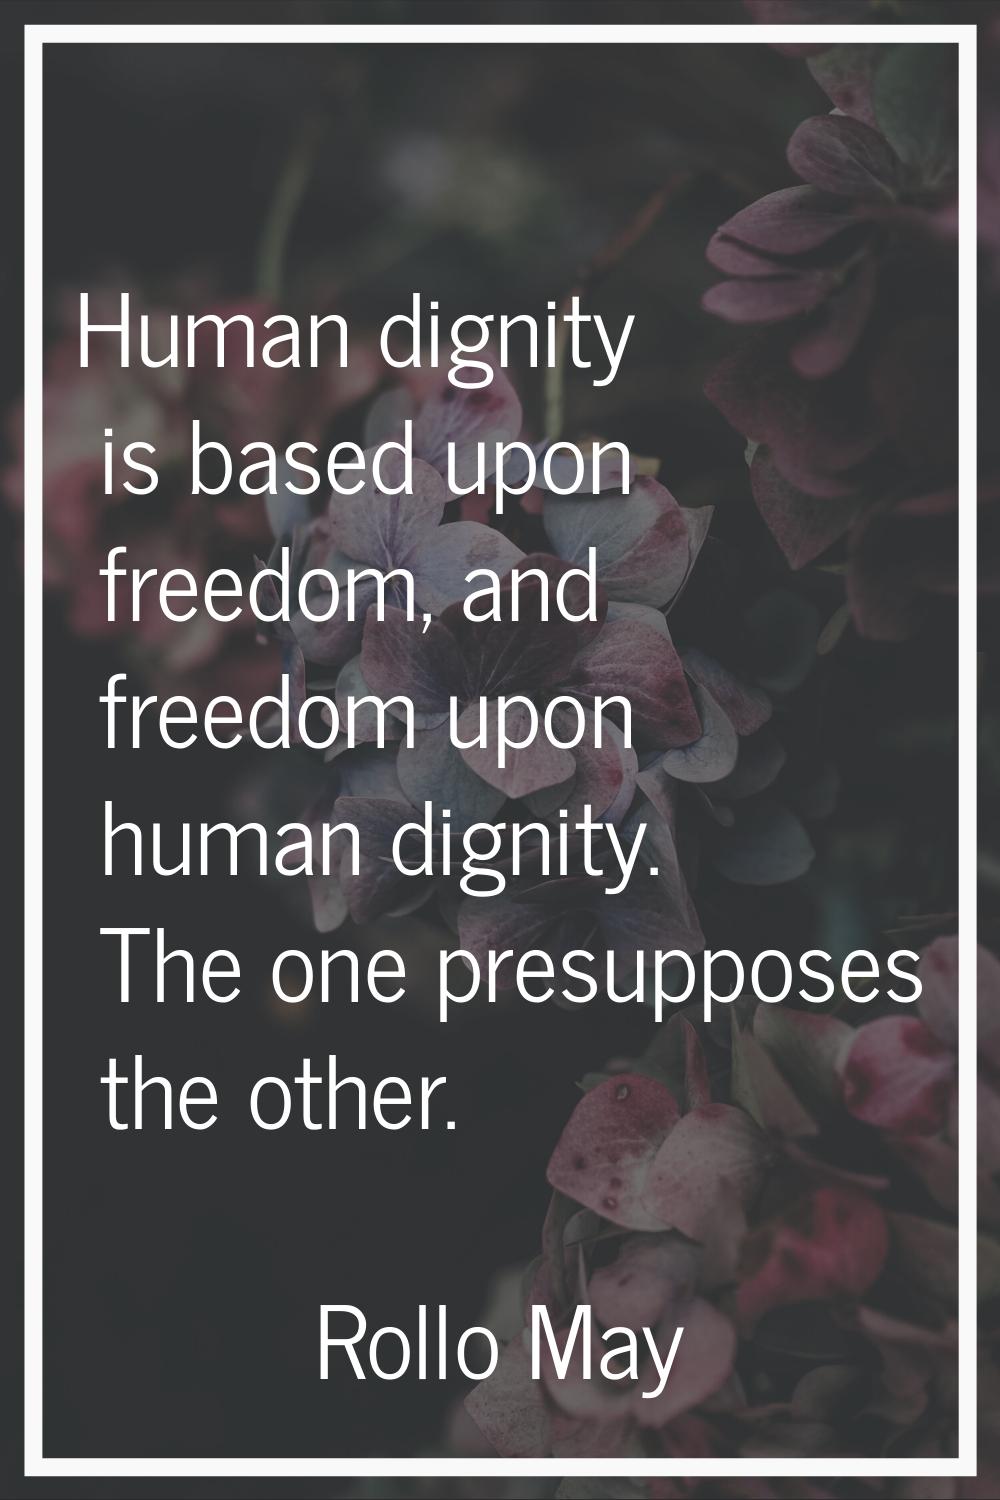 Human dignity is based upon freedom, and freedom upon human dignity. The one presupposes the other.